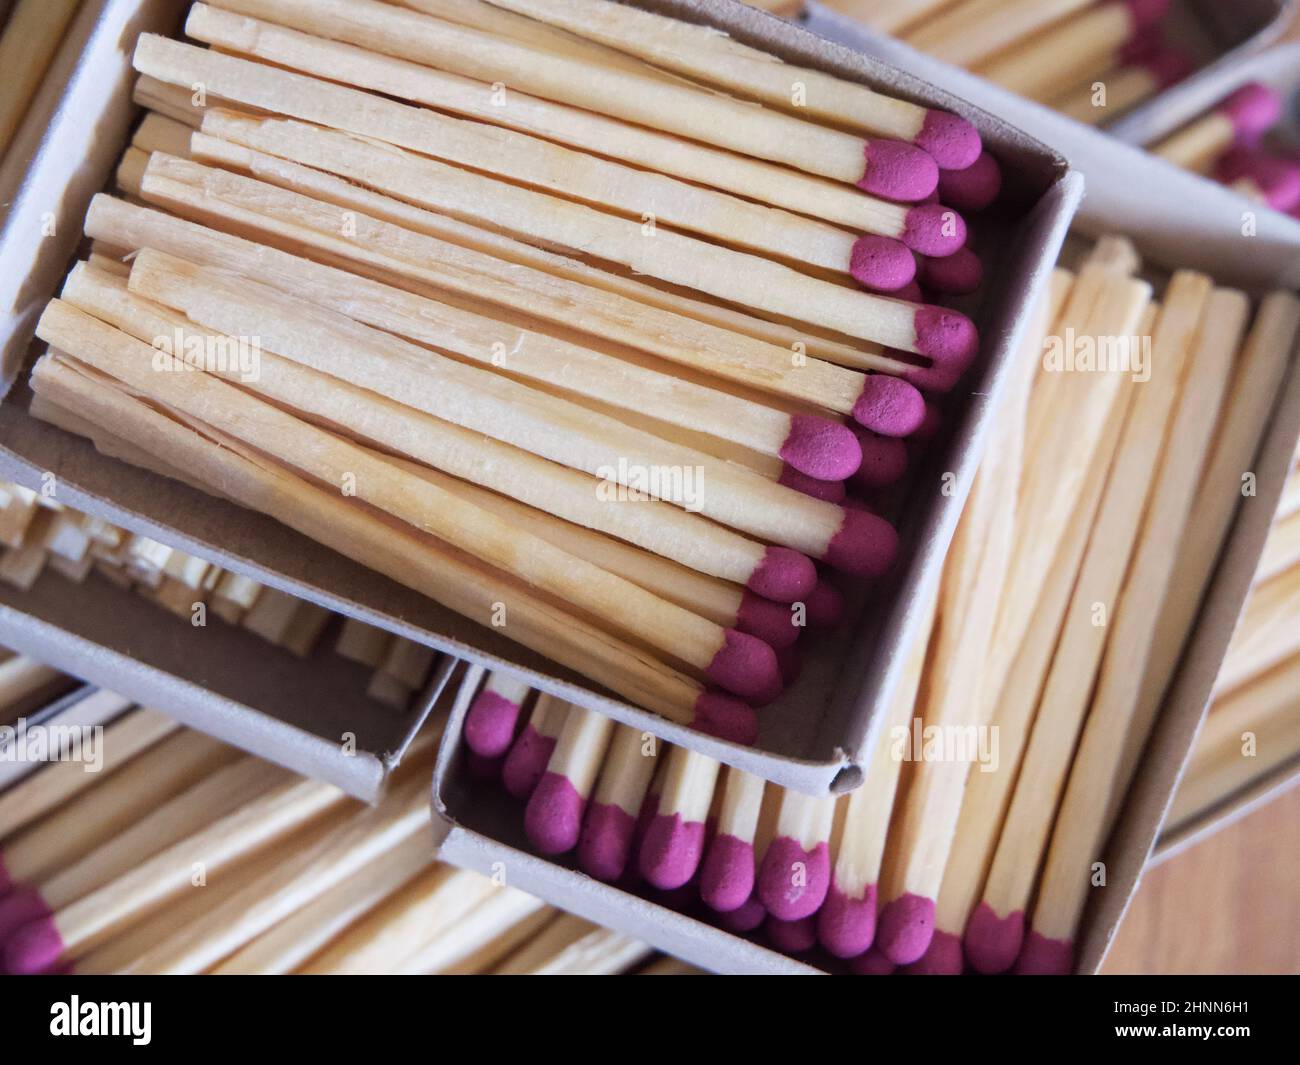 Several boxes filled with matches, a close-up shot. Matchboxes. Stock Photo